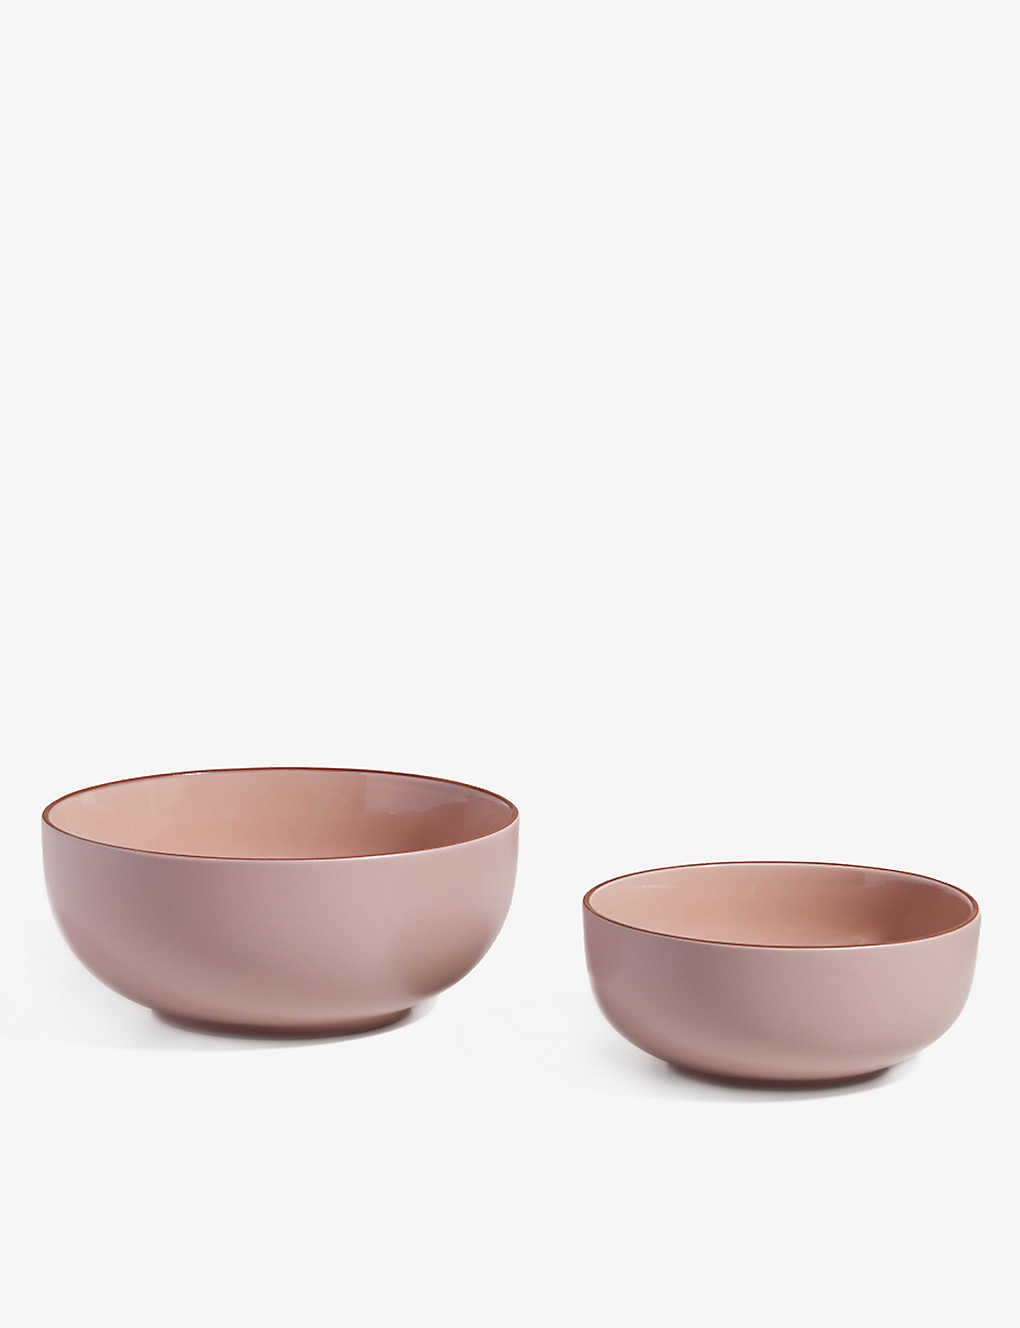 Our Place Spice Gather Ceramic Bowls Set Of Two